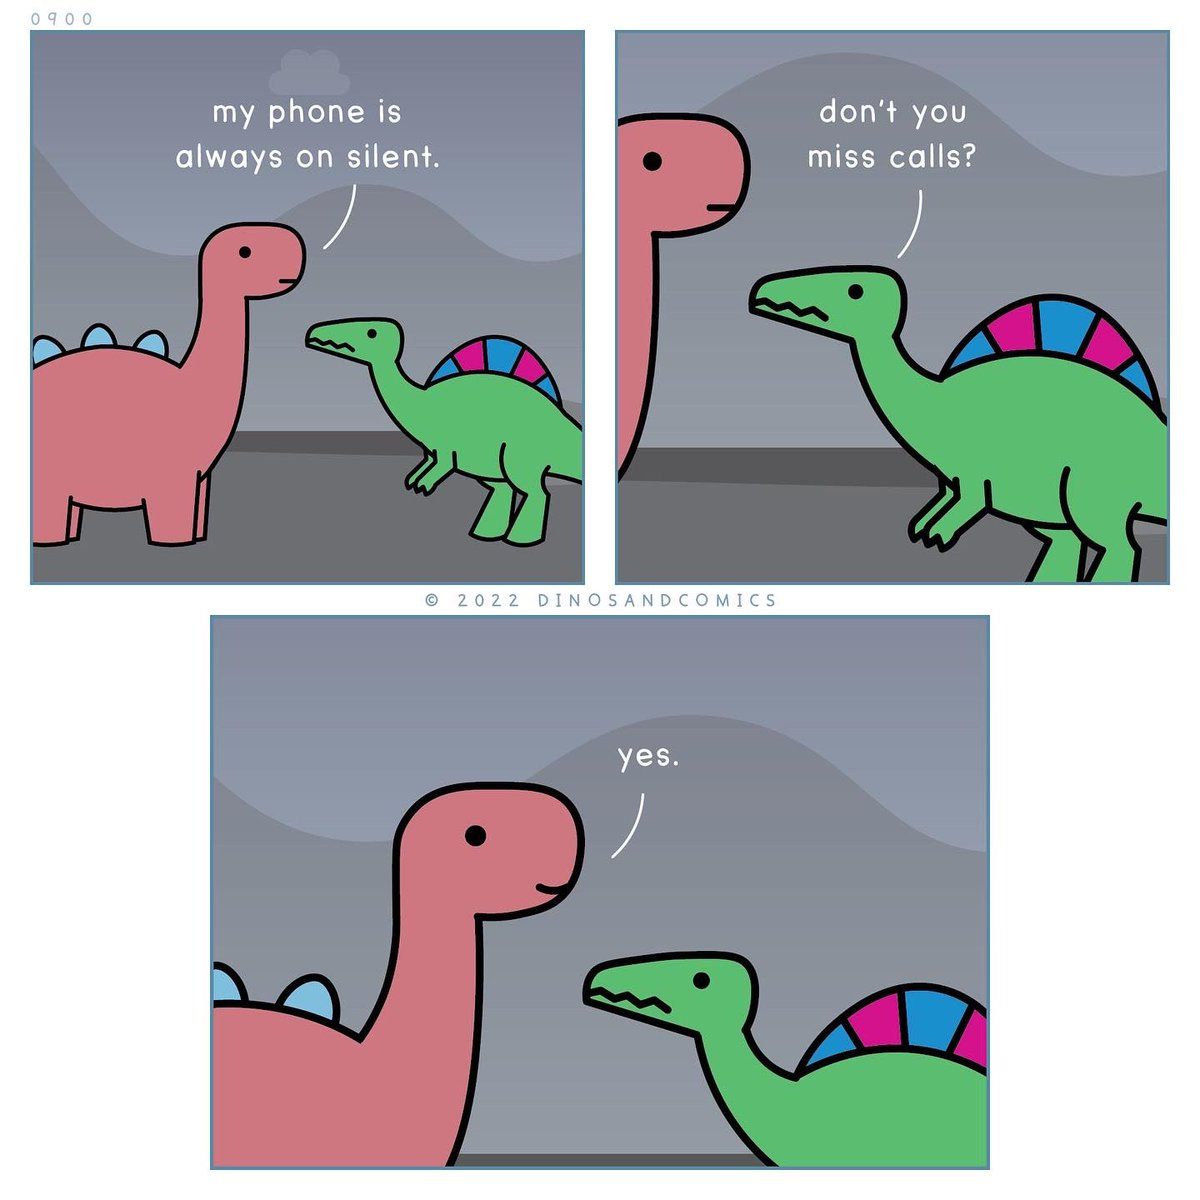 Comic of two dinos talking.

Dino 1: My phone is always on silent.
Dino 2: Don’t you miss calls?
Dino 1, smiling: Yes.